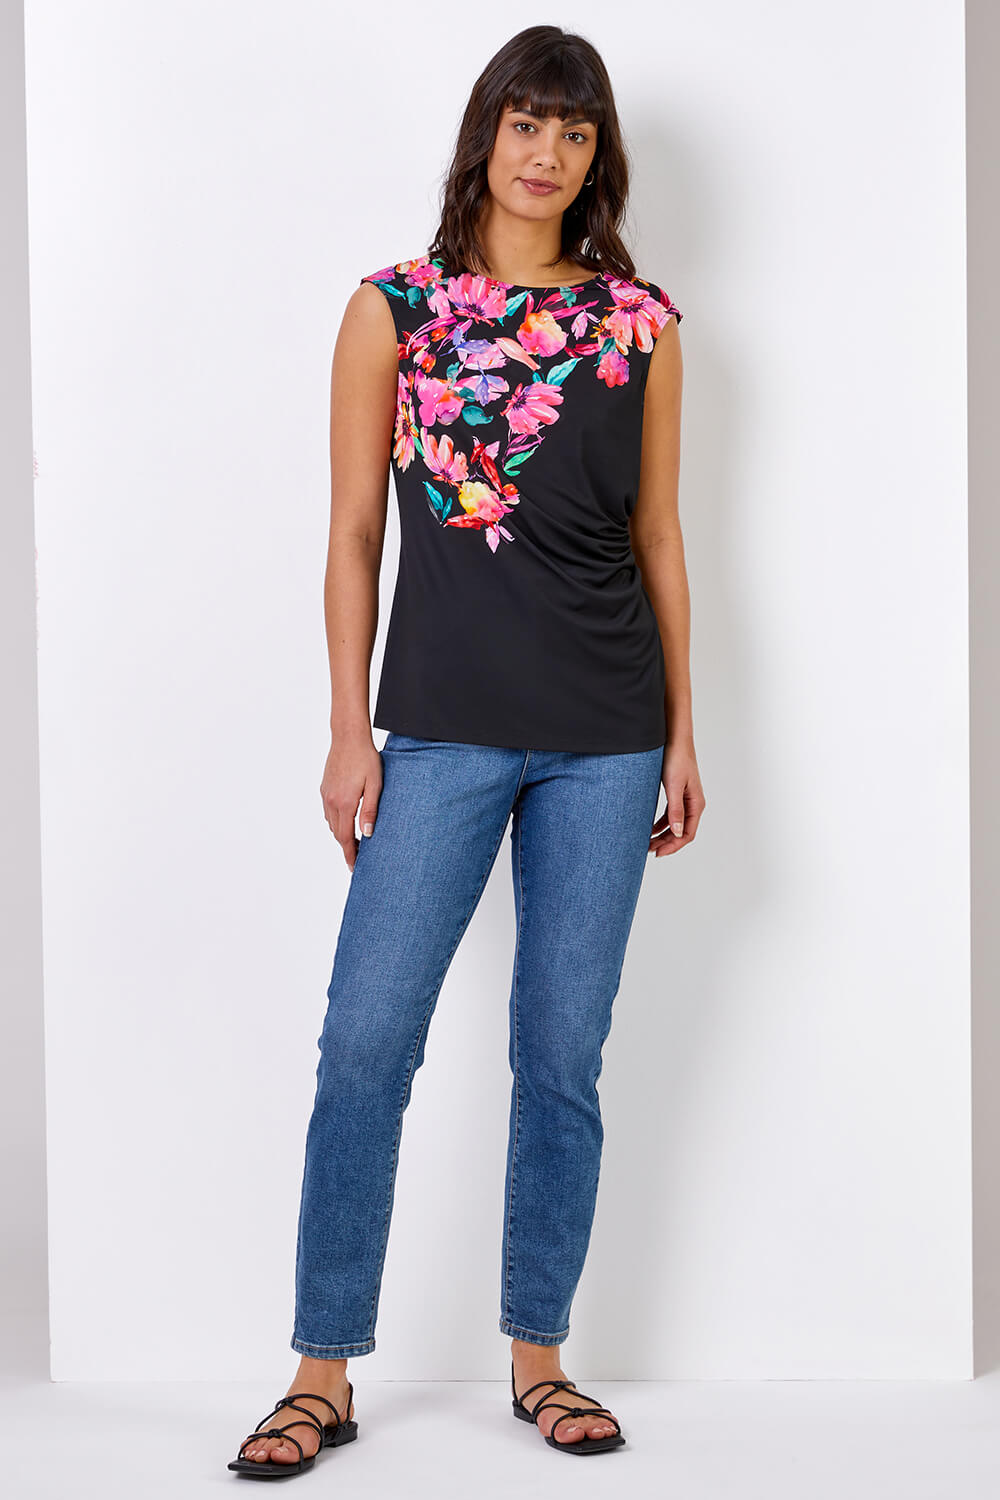 Black Floral Border Print Luxe Stretch Top, Image 2 of 4